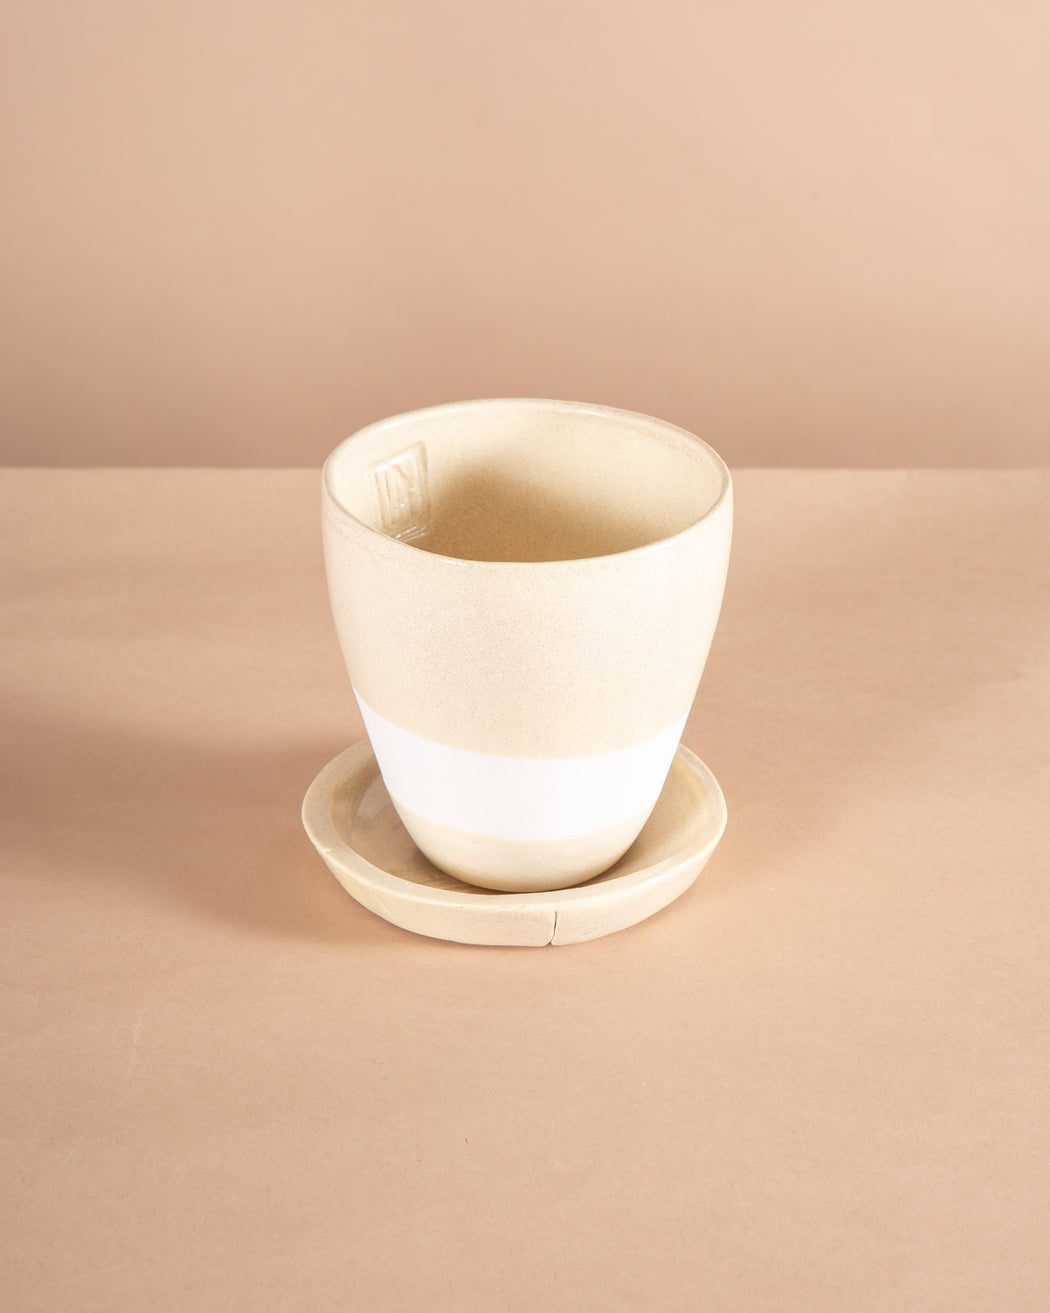 4 Inch L'ATELIER BY NATHALIE POT- BEIGE - Small